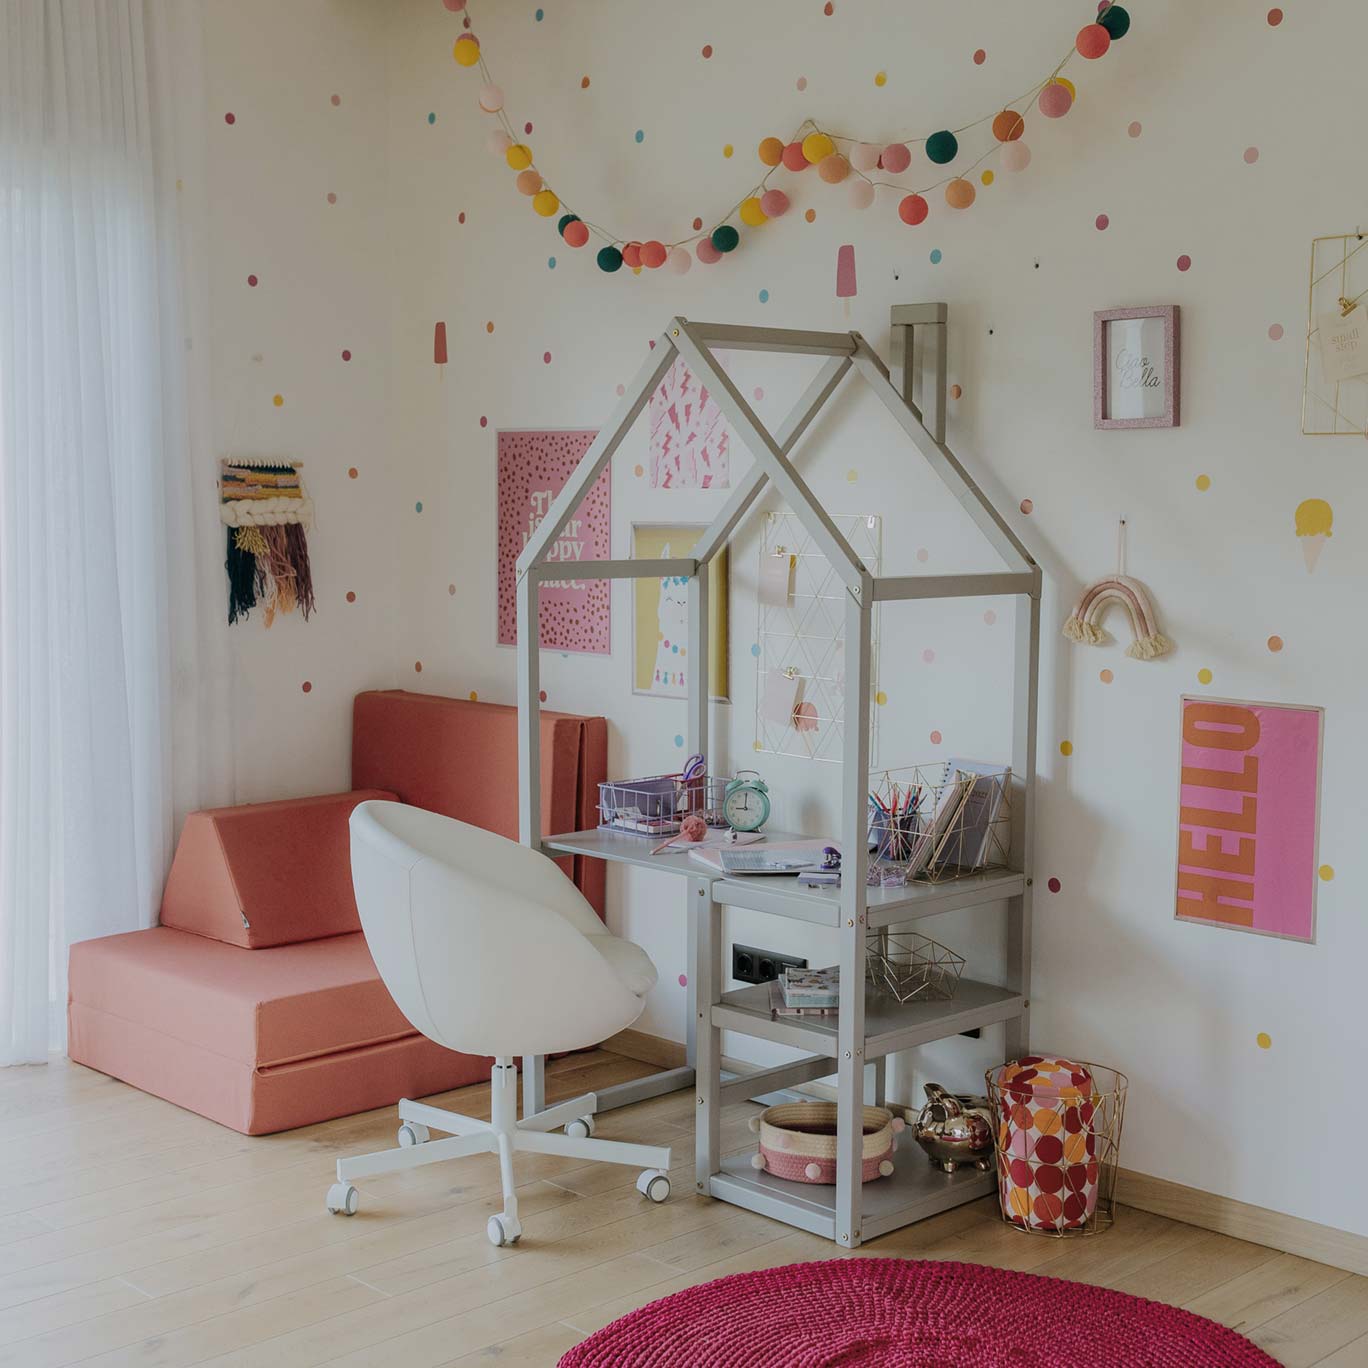 A girl's room with a desk, chair and polka dots.